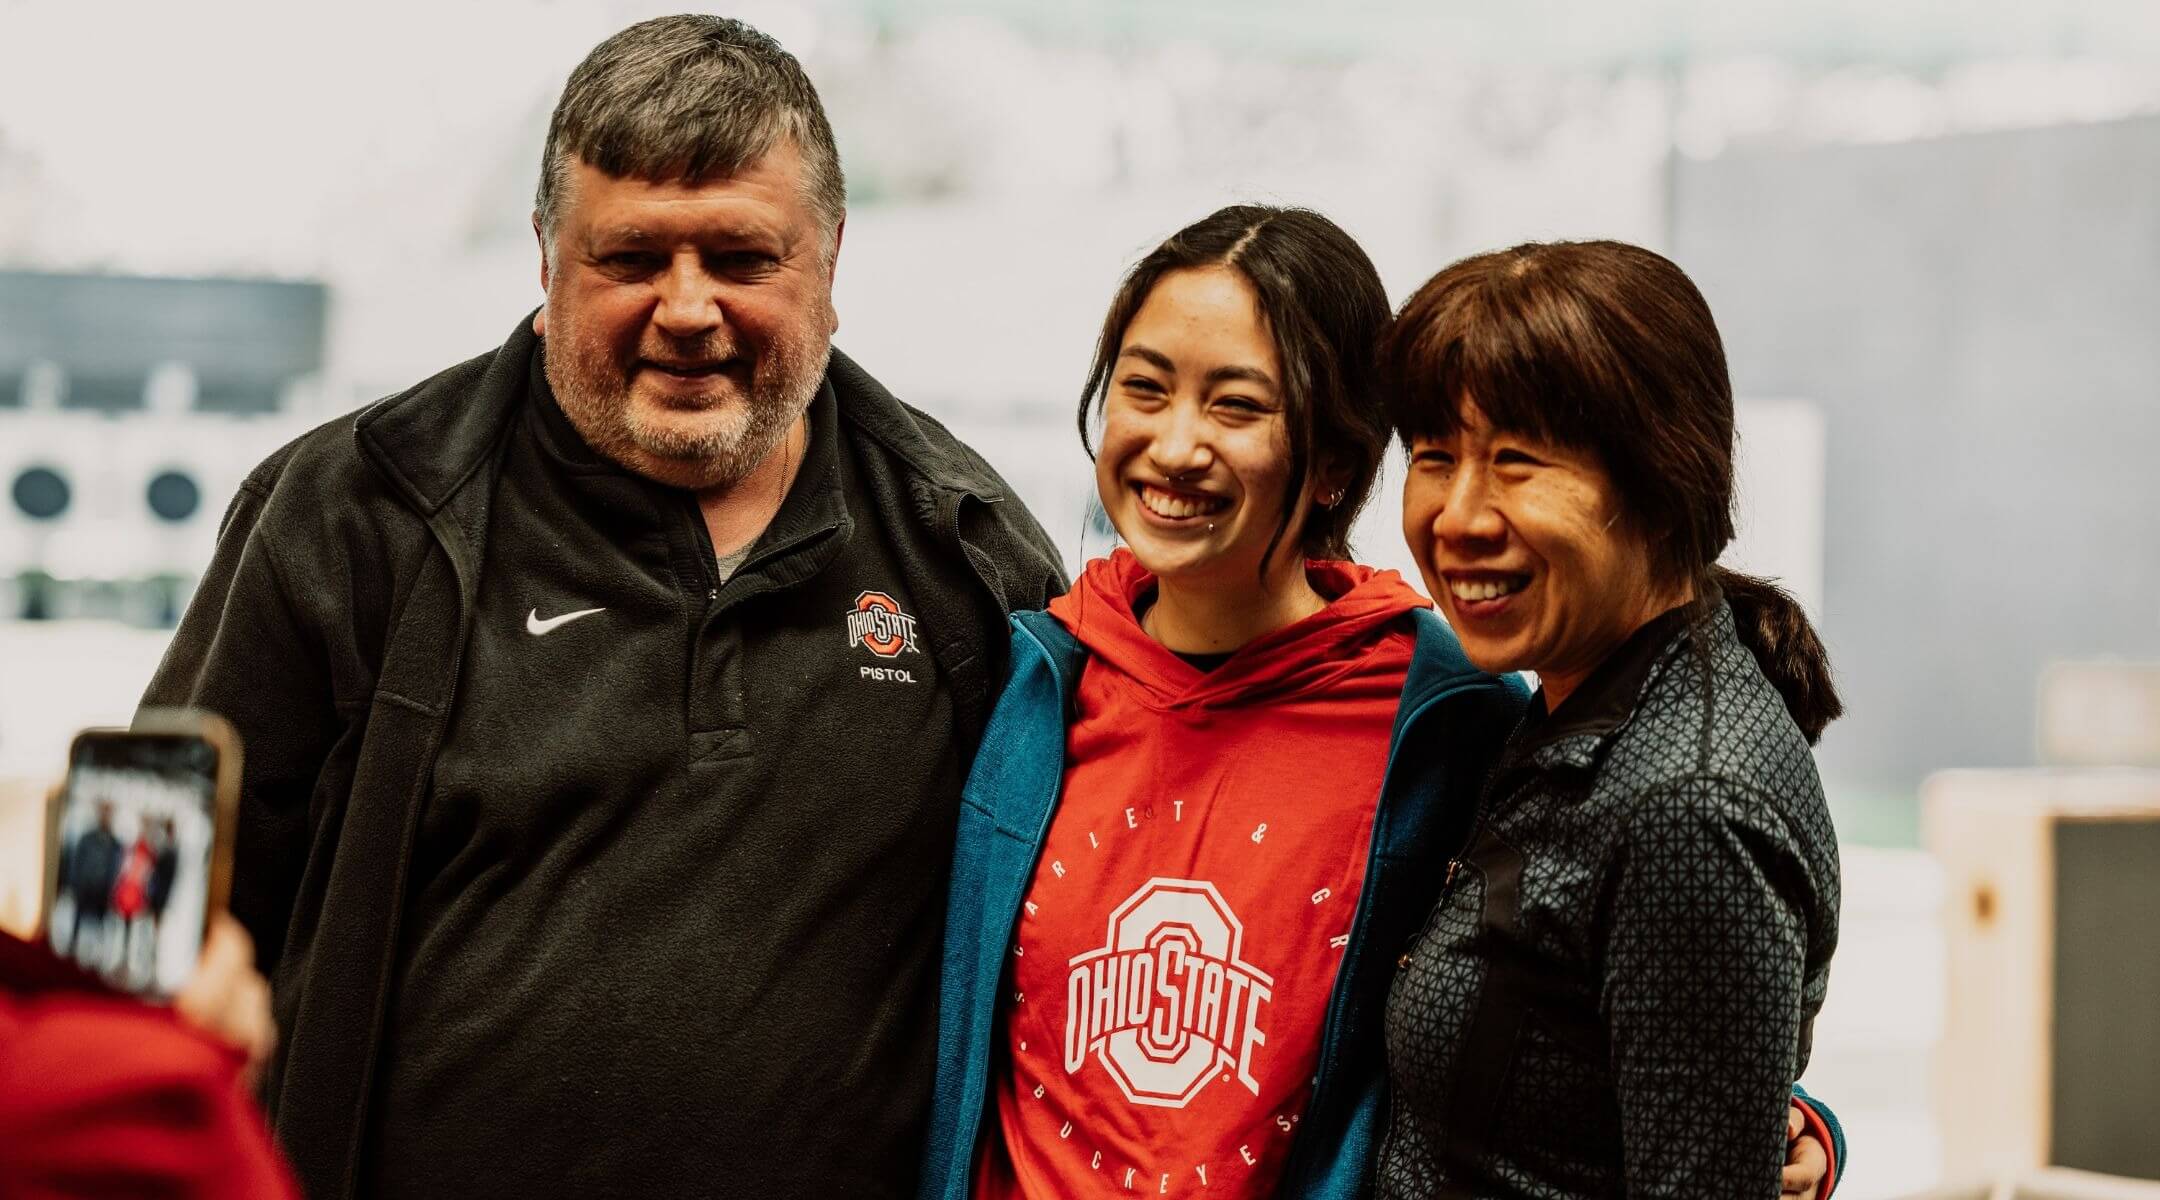 Ada Korkhin, center, celebrates with her parents Yakov Korkhin and May Han at the USA Shooting Olympic qualifiers.